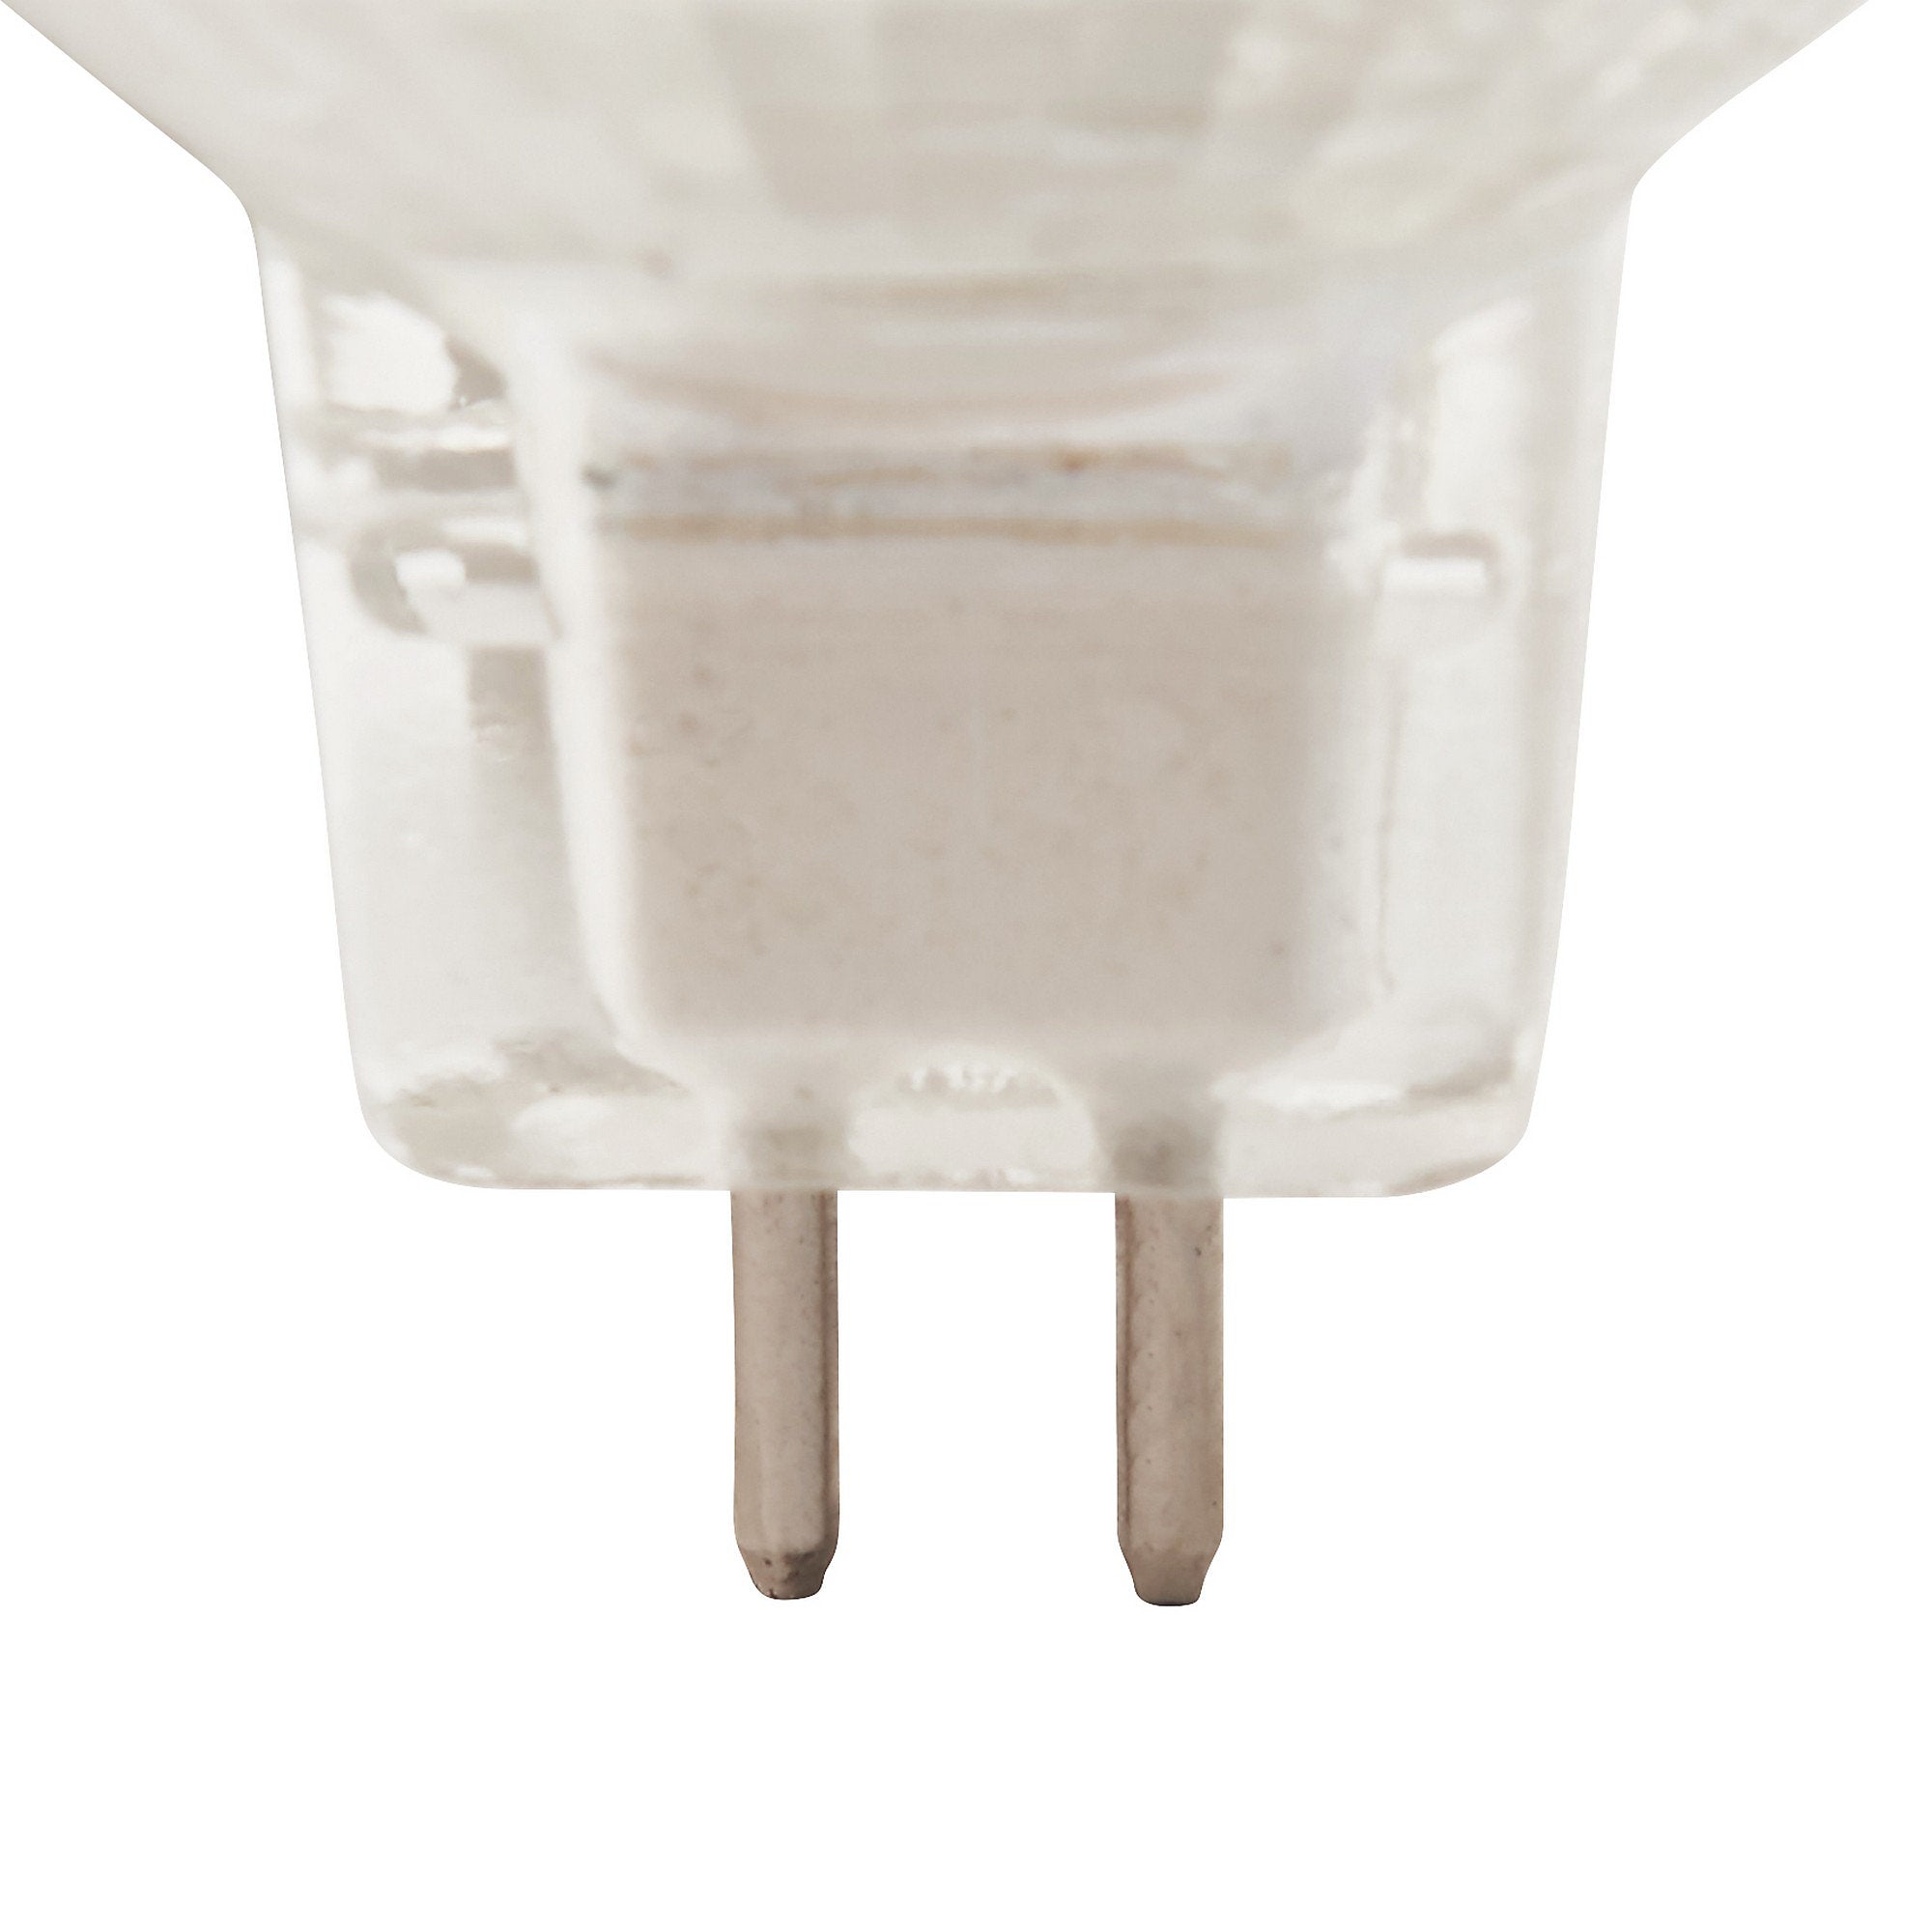 Diall Light bulb,3.6W 345lm white Pack of 8 2141